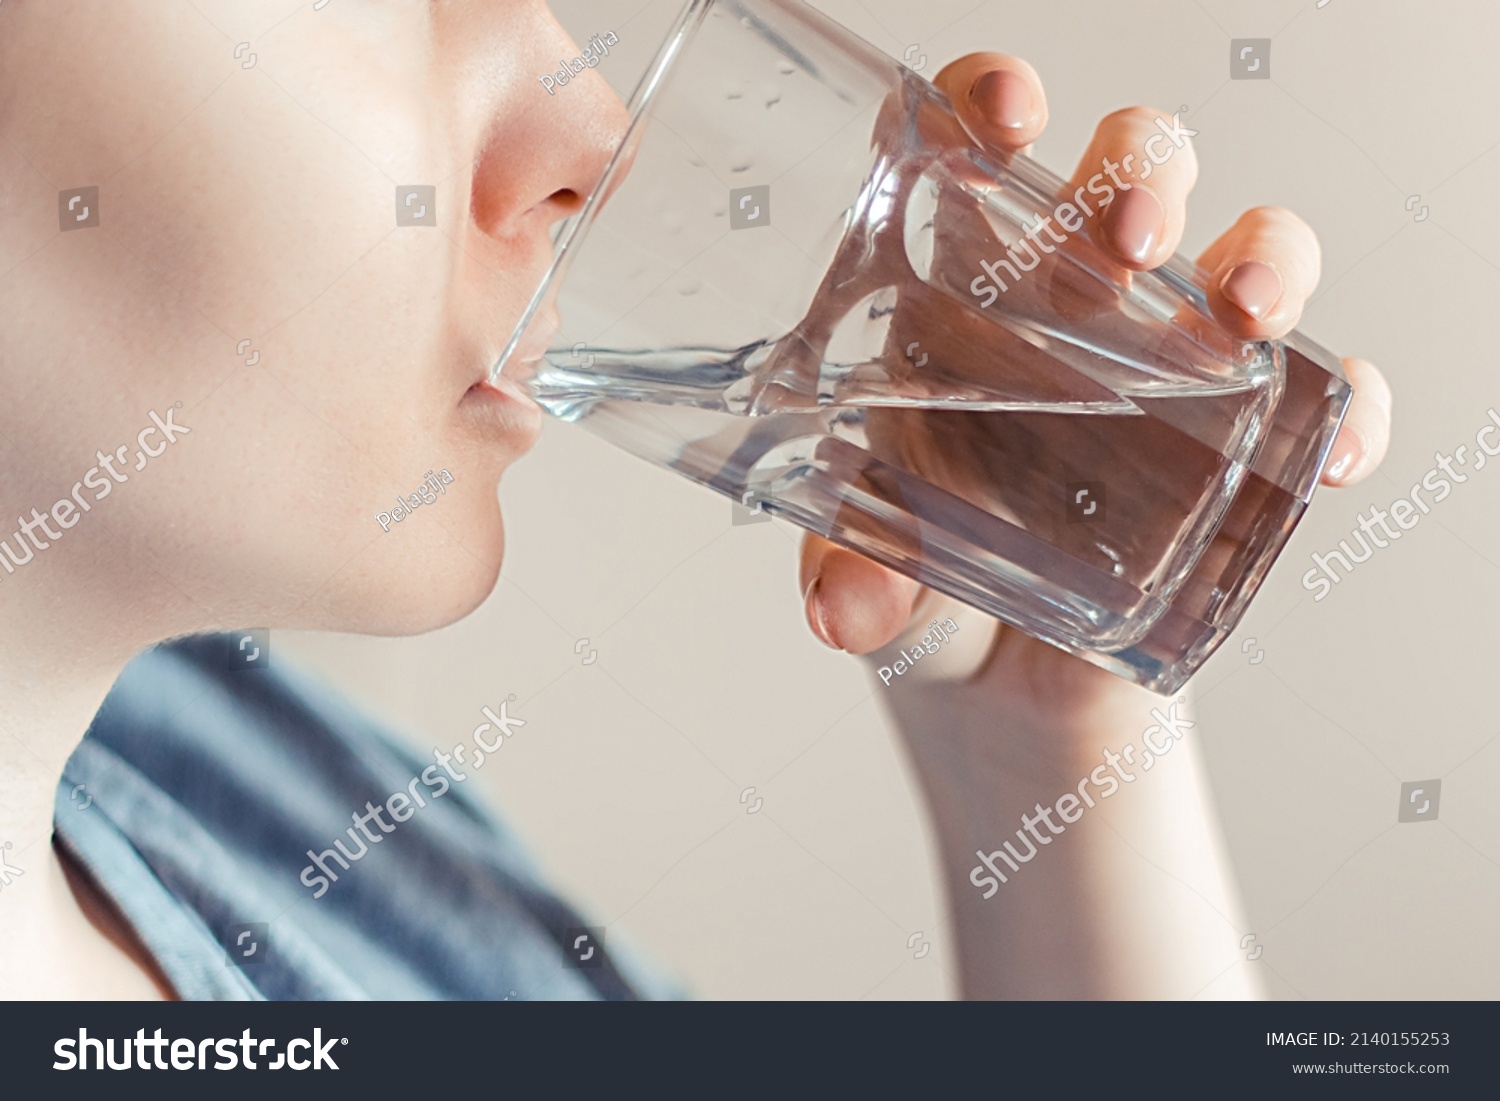 Woman drinks clean water. World Water Day. Health care concept. Diet and detox, increase metabolism. Hand holds drinking glass of water. #2140155253